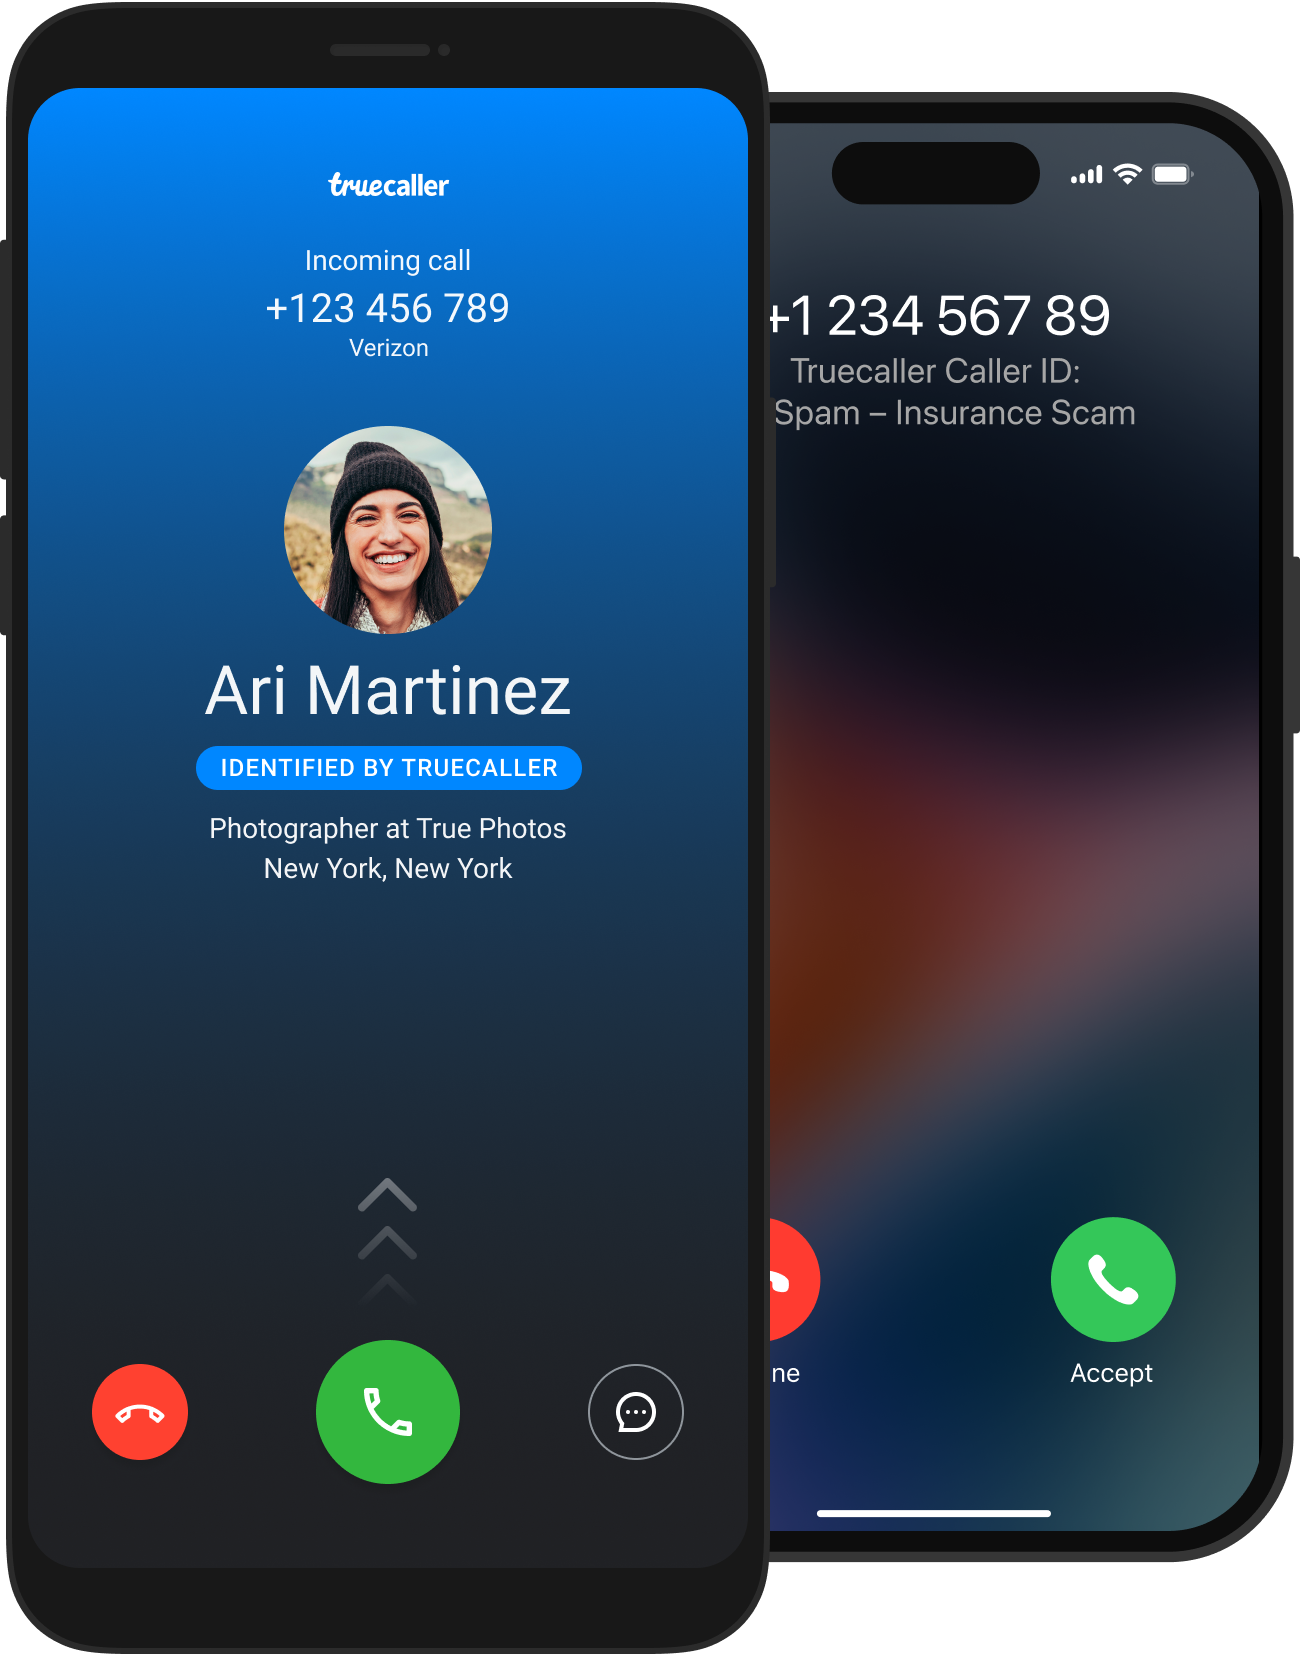 two screens - one for android and one for iOS, showing truecaller identifying an incoming phone call